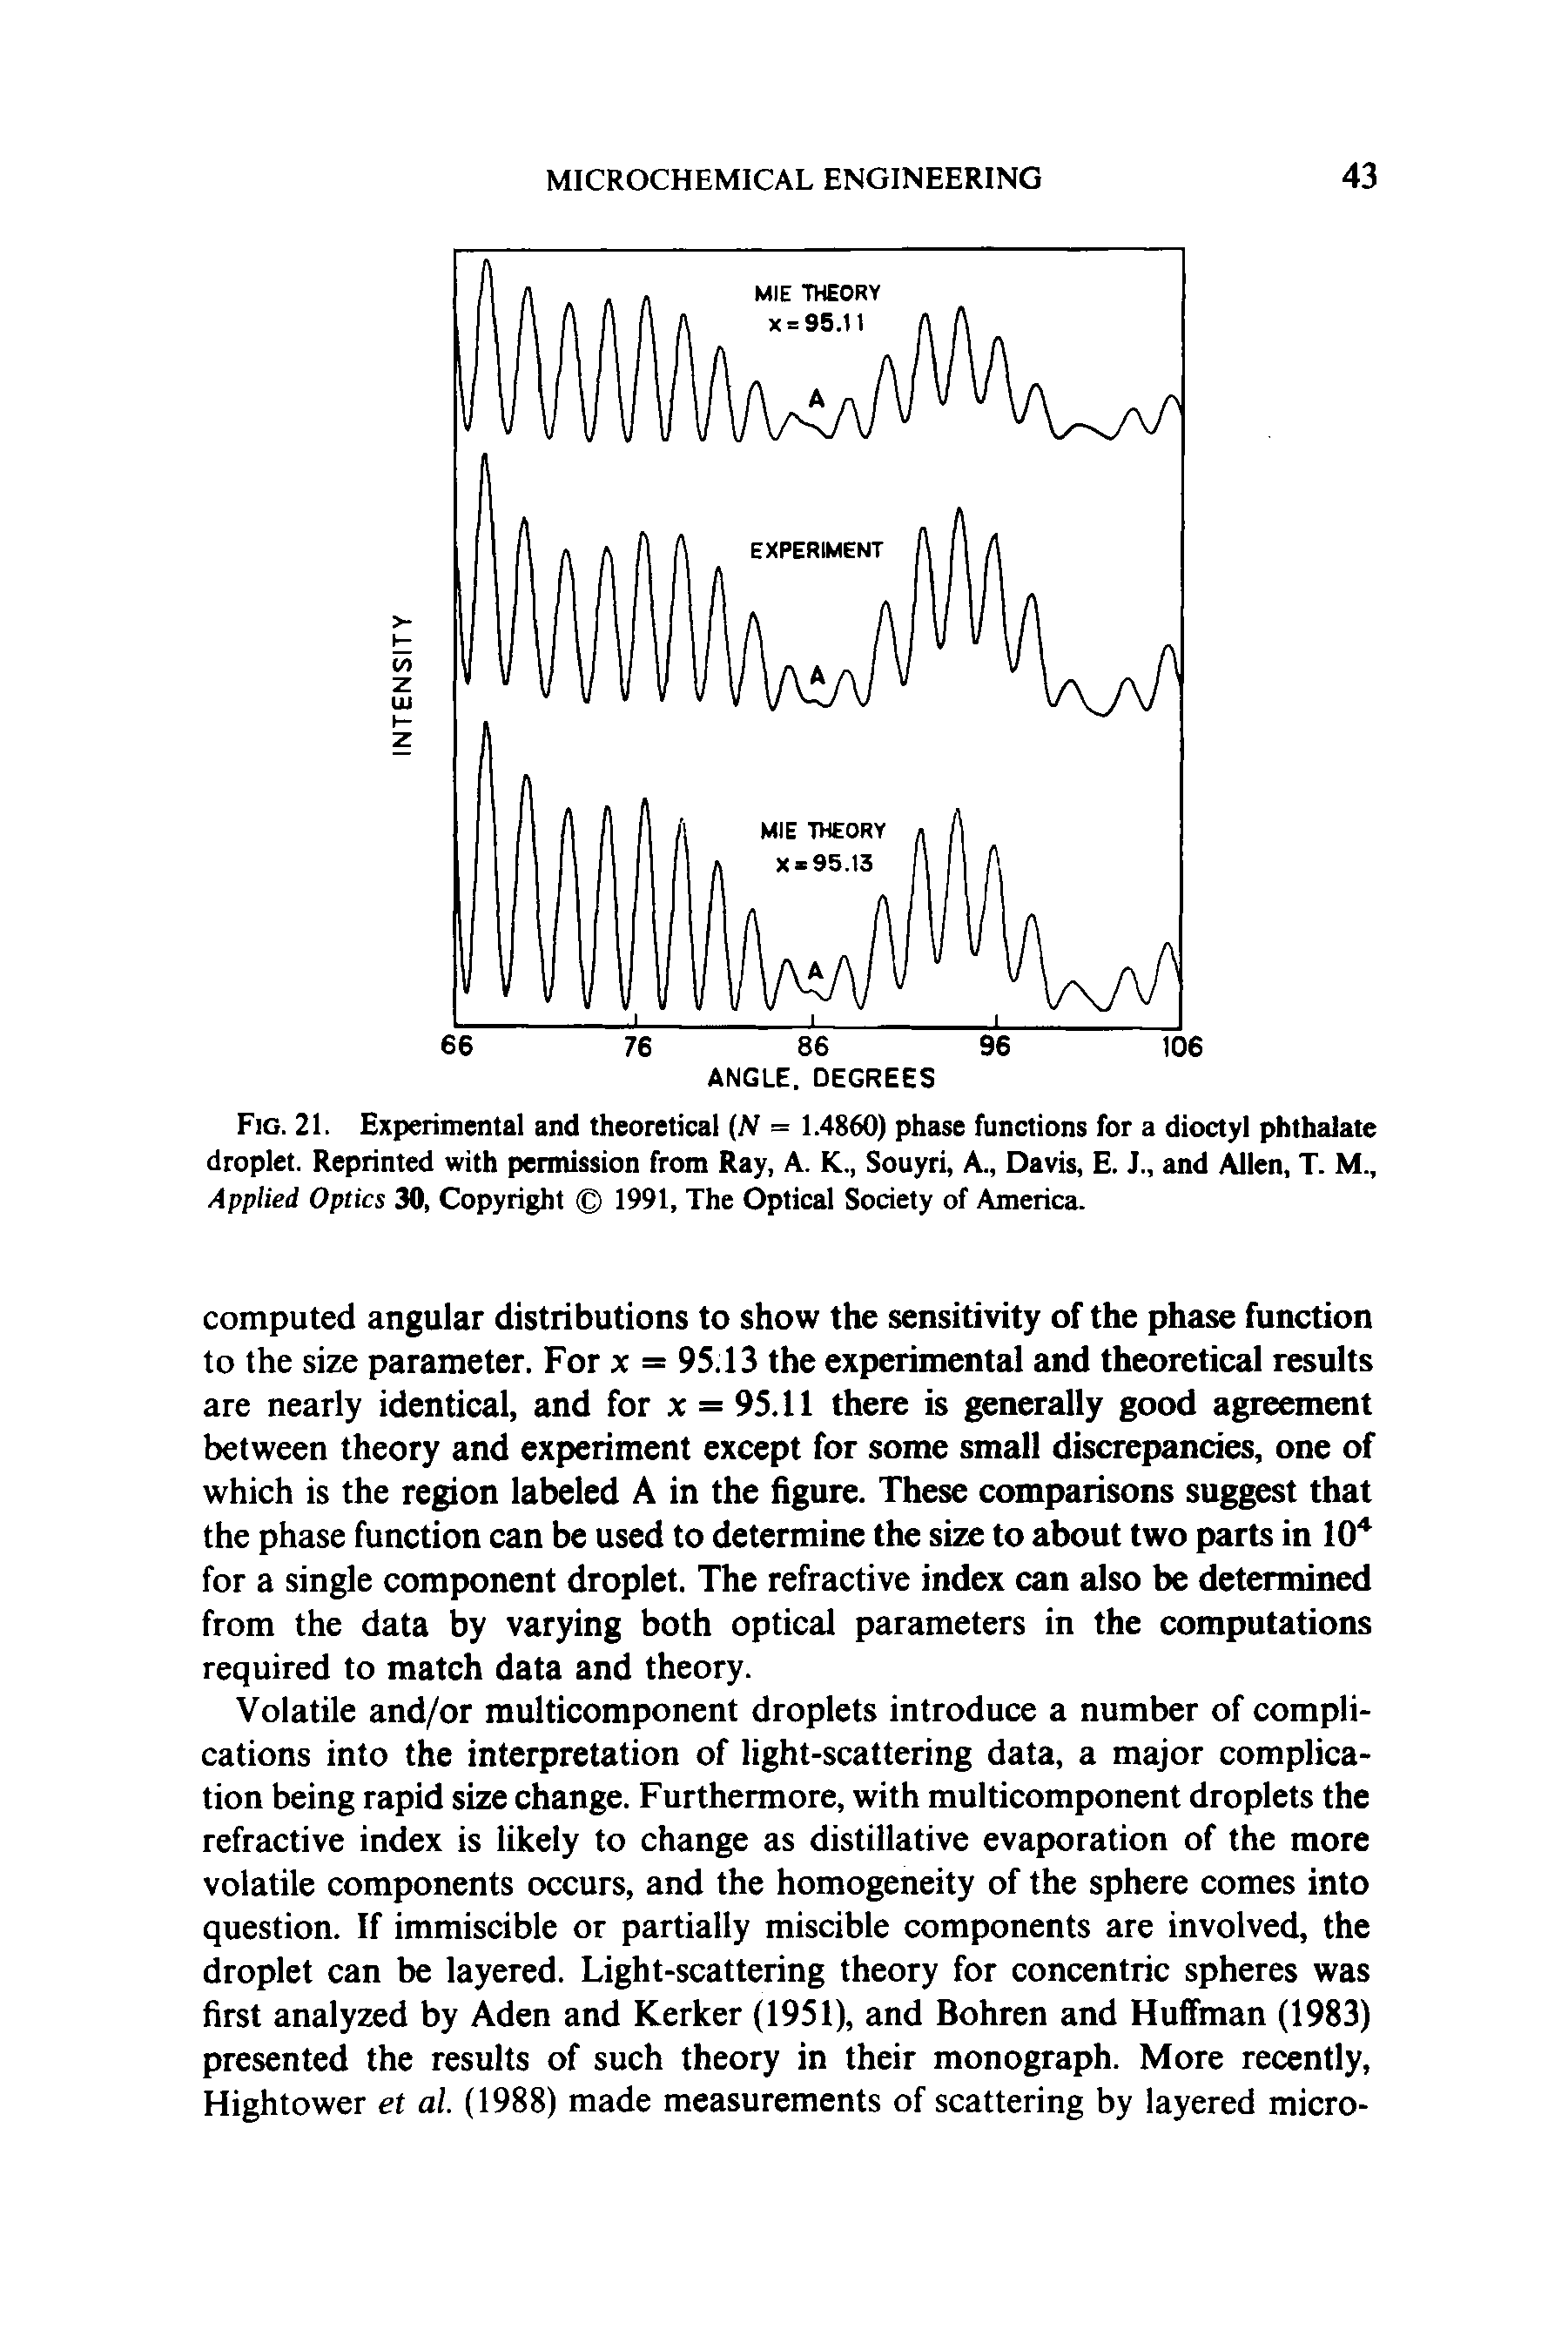 Fig. 21. Experimental and theoretical N = 1.4860) phase functions for a dioctyl phthalate droplet. Reprinted with permission from Ray, A. K., Souyri, A., Davis, E. J., and Allen, T. M., Applied Optics 30, Copyright 1991, The Optical Society of America.